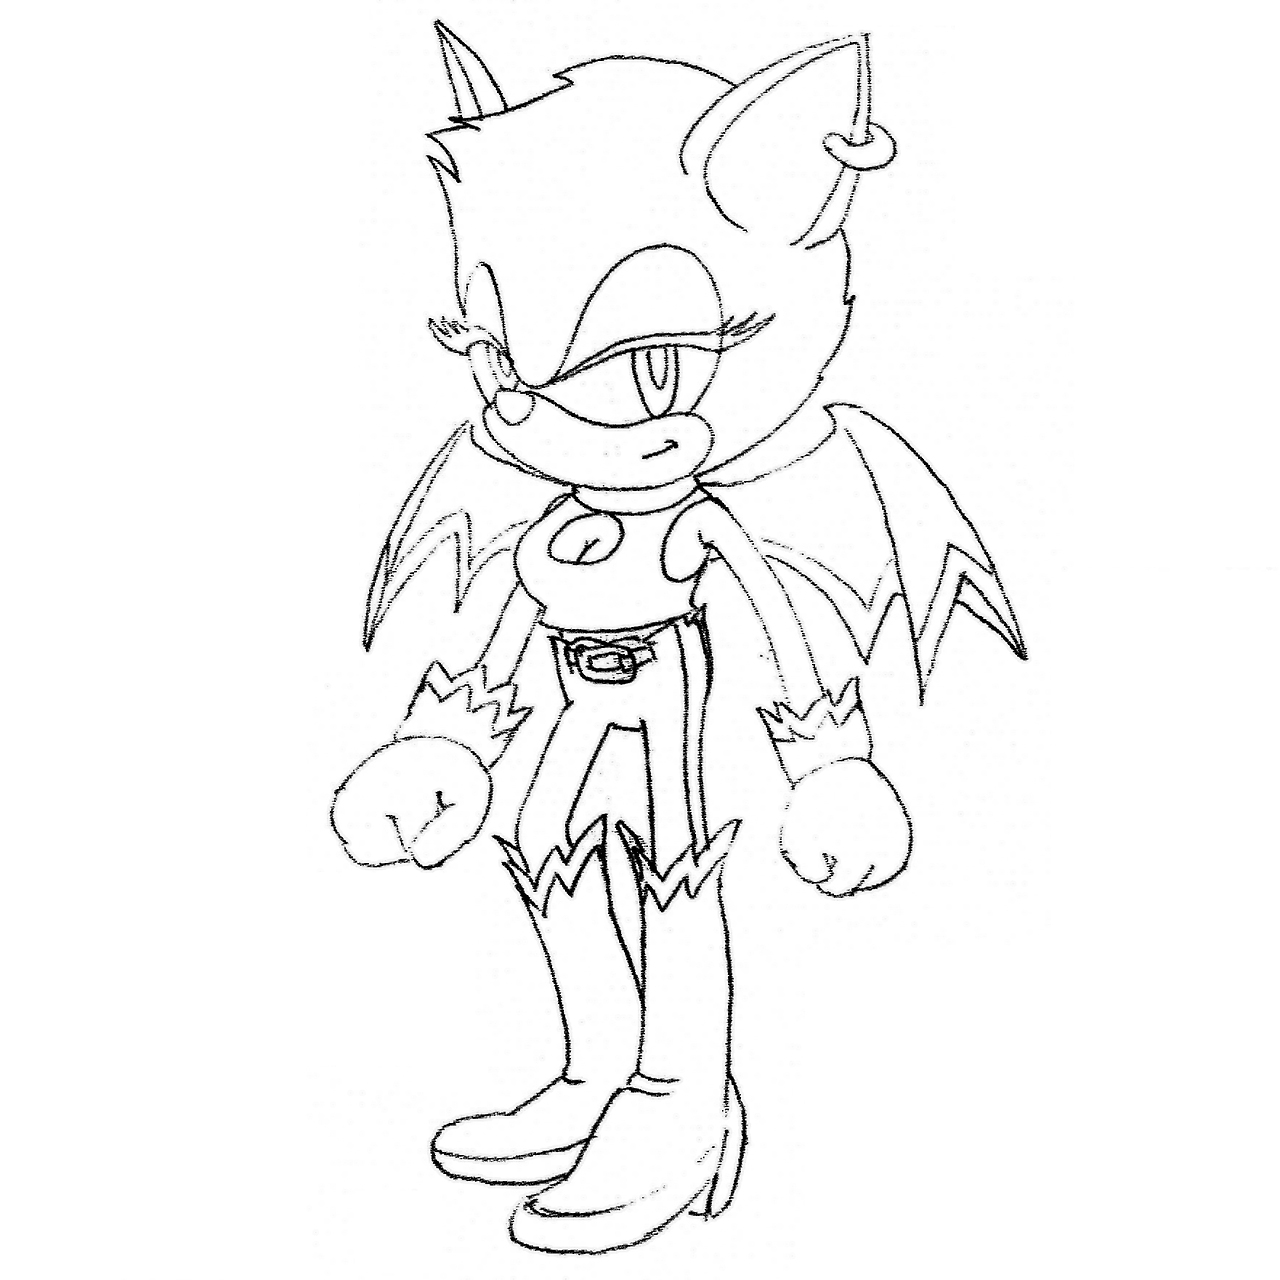 Sonic the hedgeblog â one of the original concept sketches of rouge the